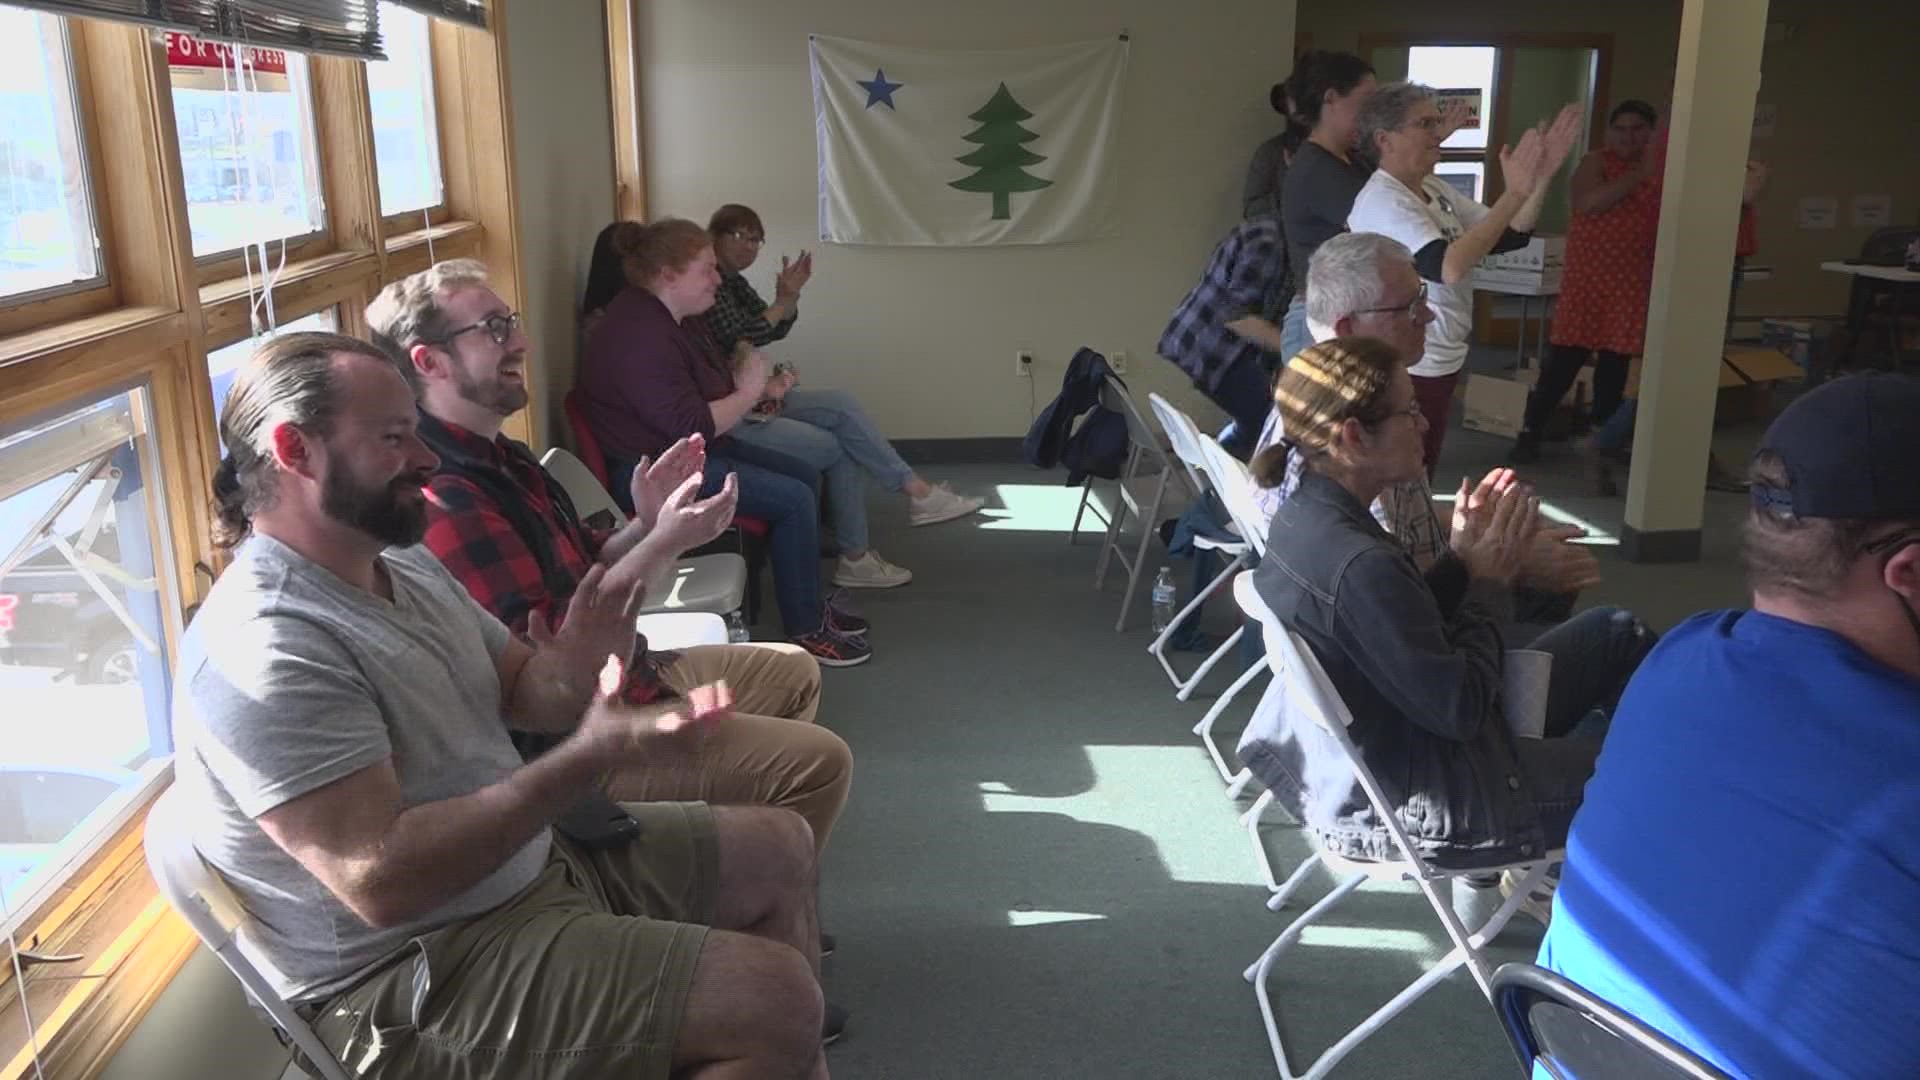 The candidates spent Saturday meeting Mainers across the state and encouraging them to vote.